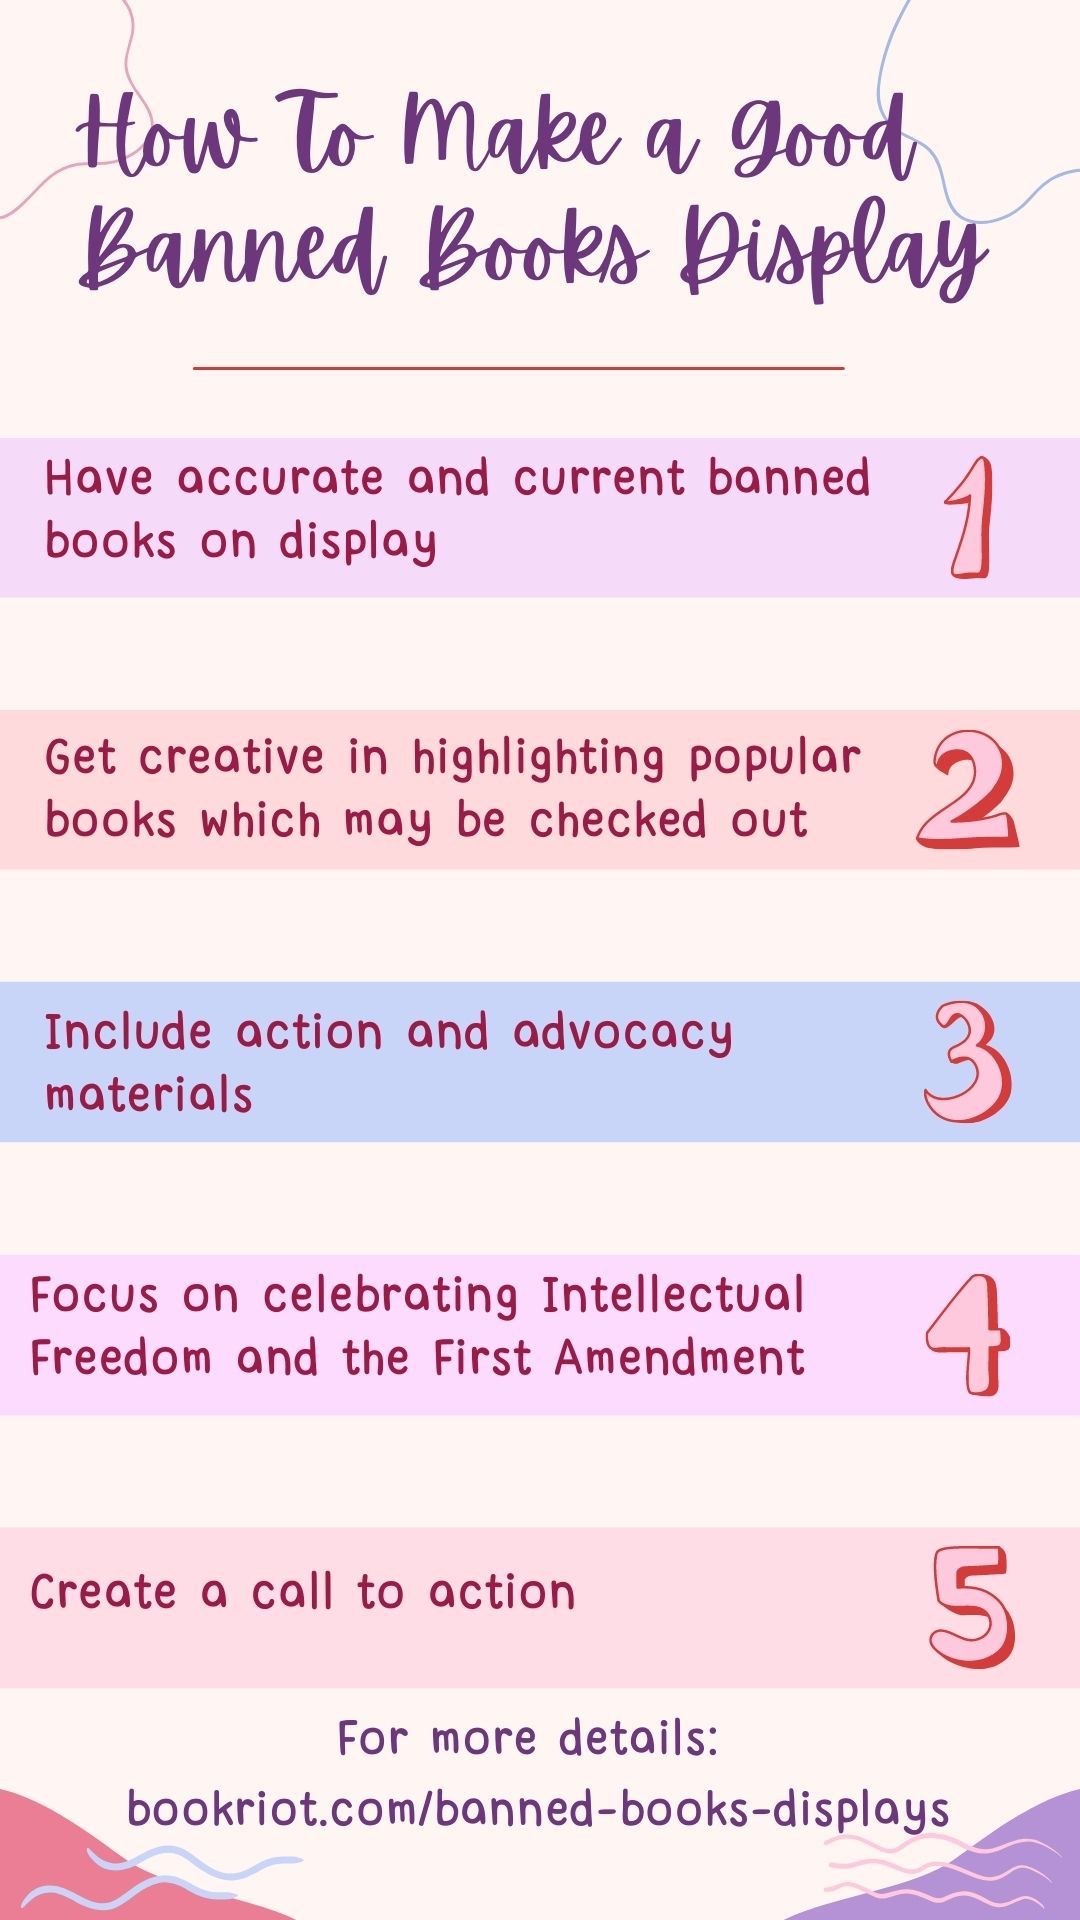 Graphic with the 5 key steps to making a good banned books display from the text above it. The graphic is in shades of pink, purple, and cream. 